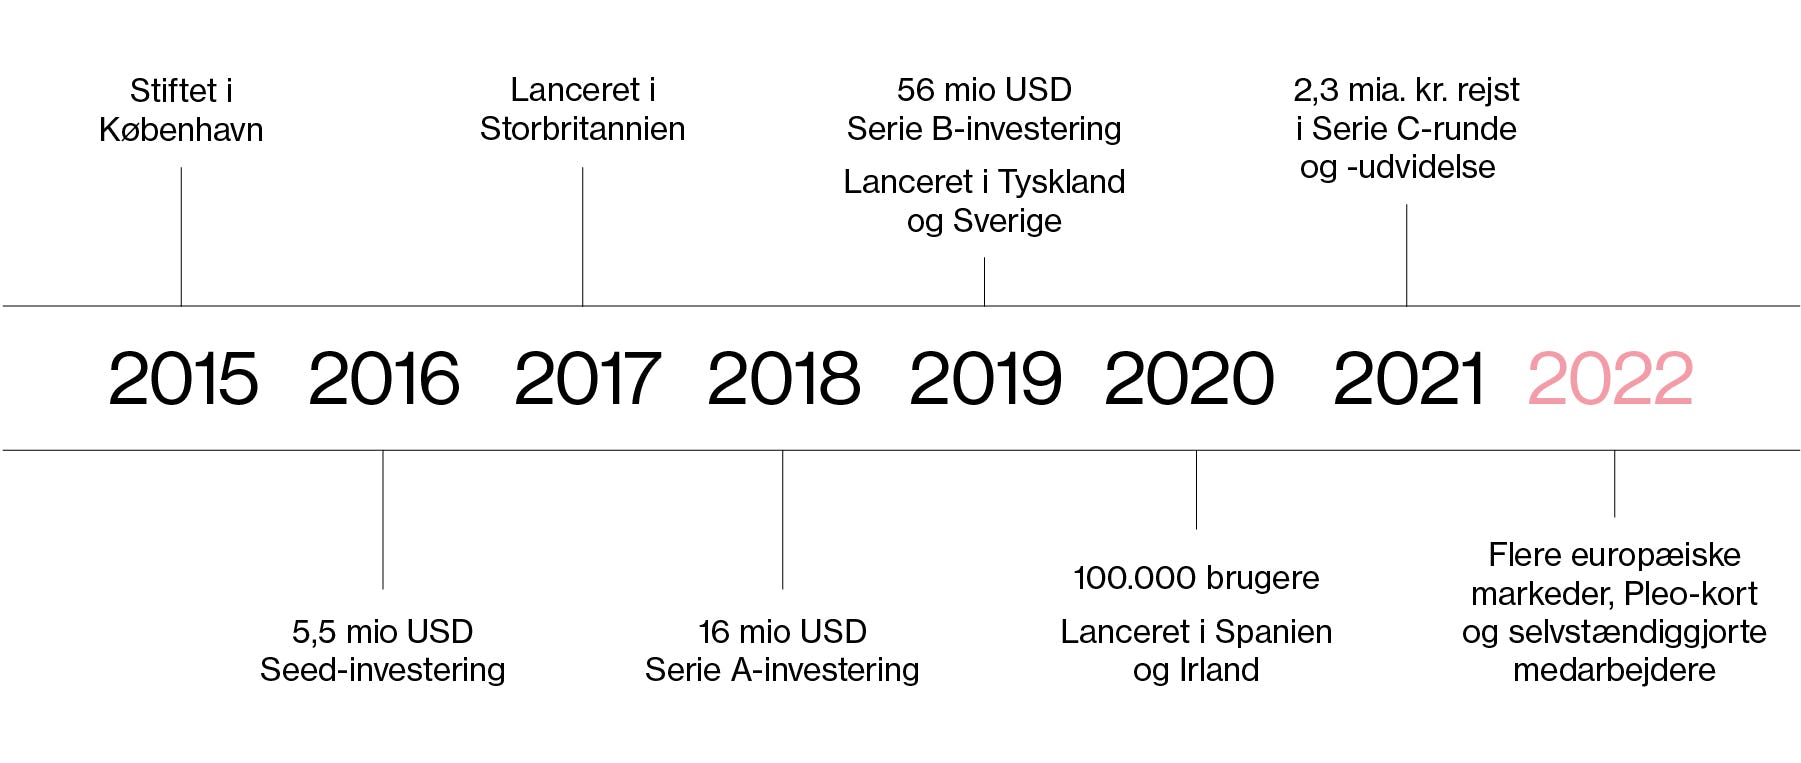 Pleo timeline from 2015 to 2022